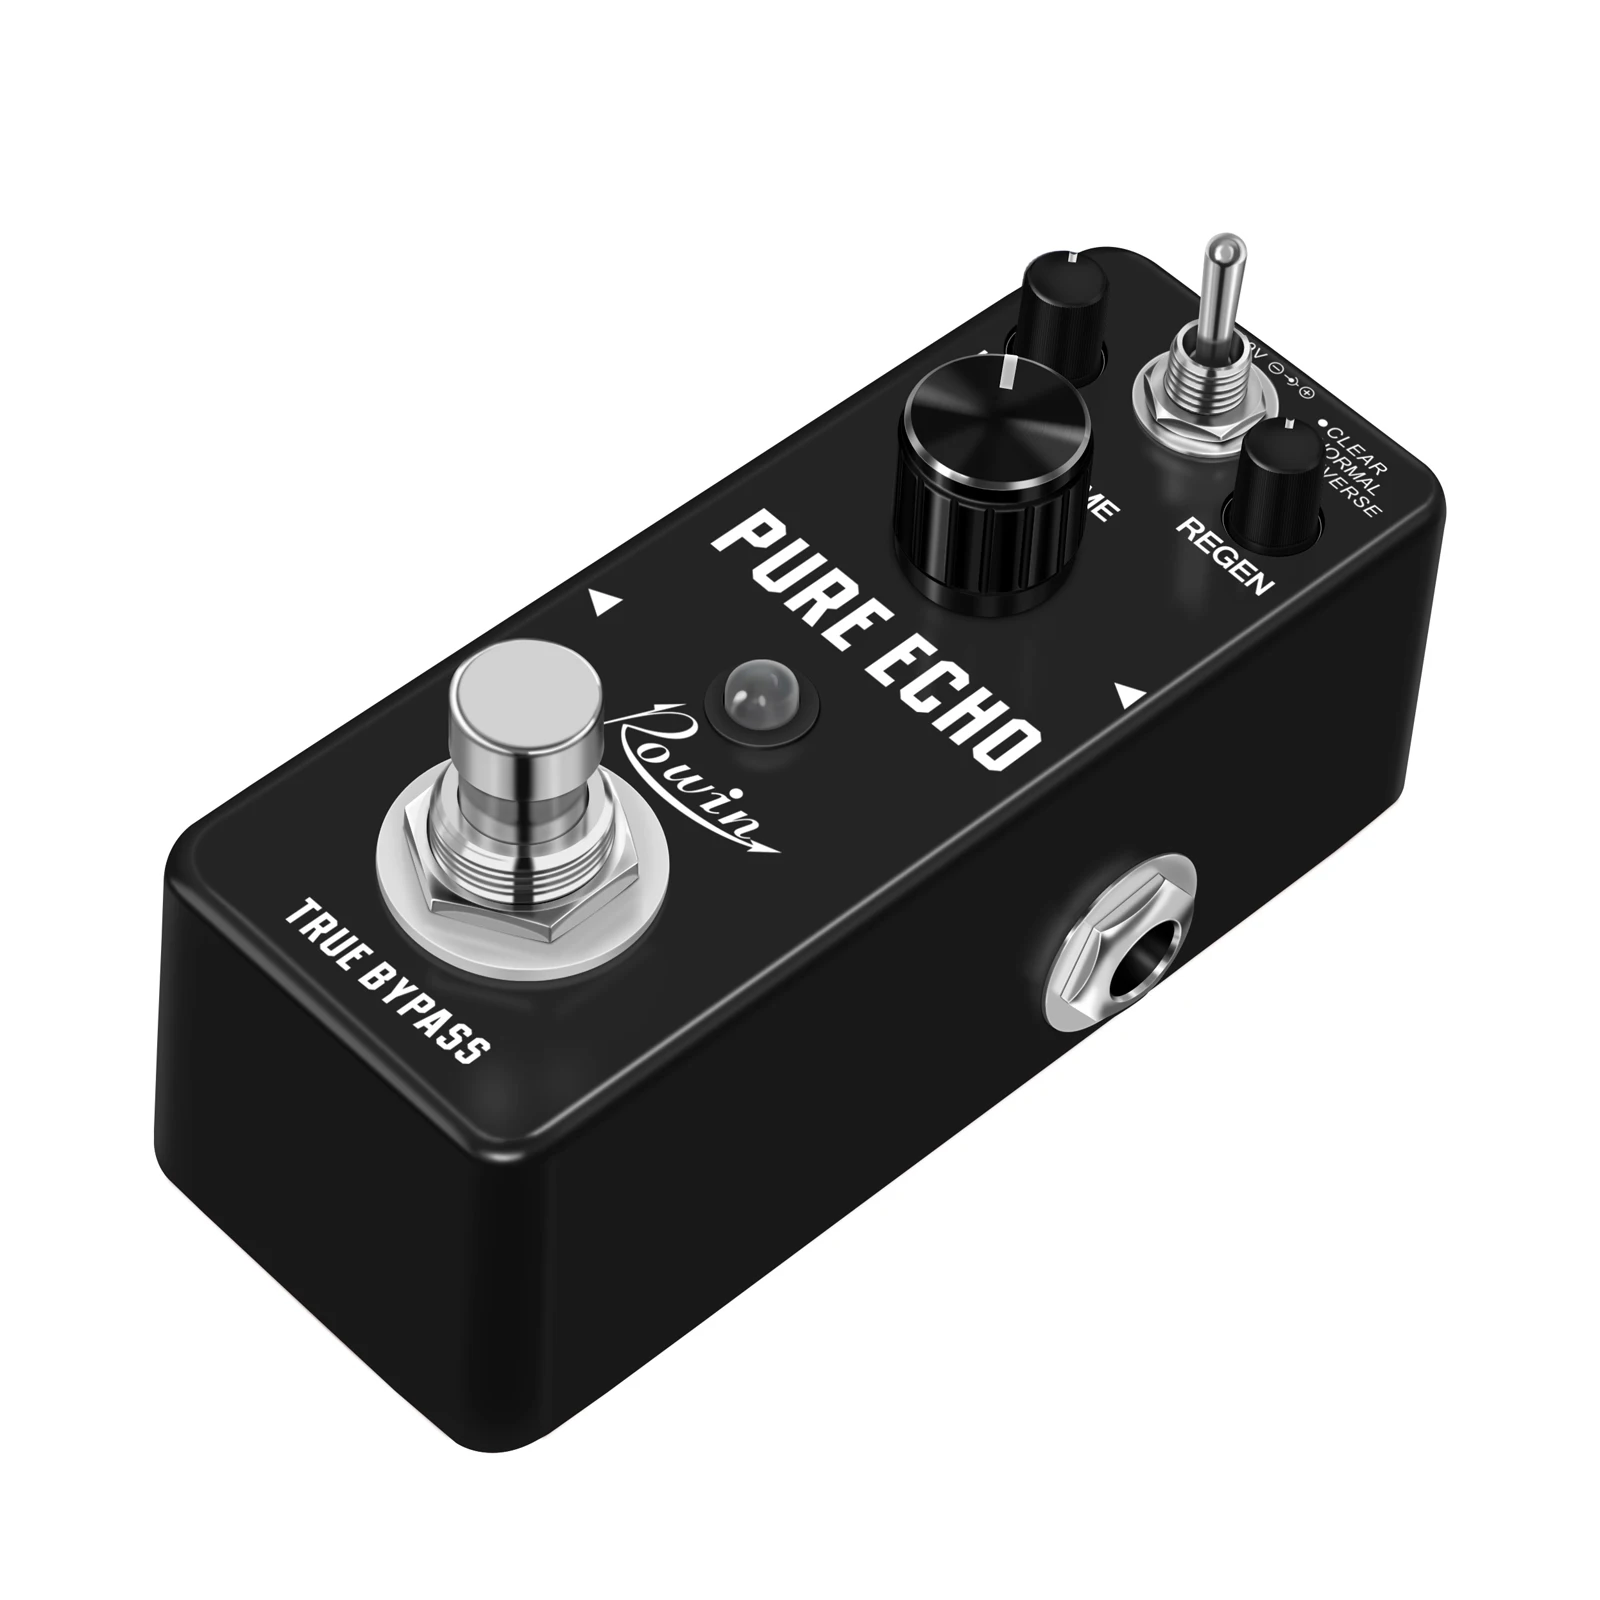 Rowin LEF-3803 Digital Delay Echo Effect Pedal for Guitar Bass with 3 Modes Clear Normal Reverse enlarge